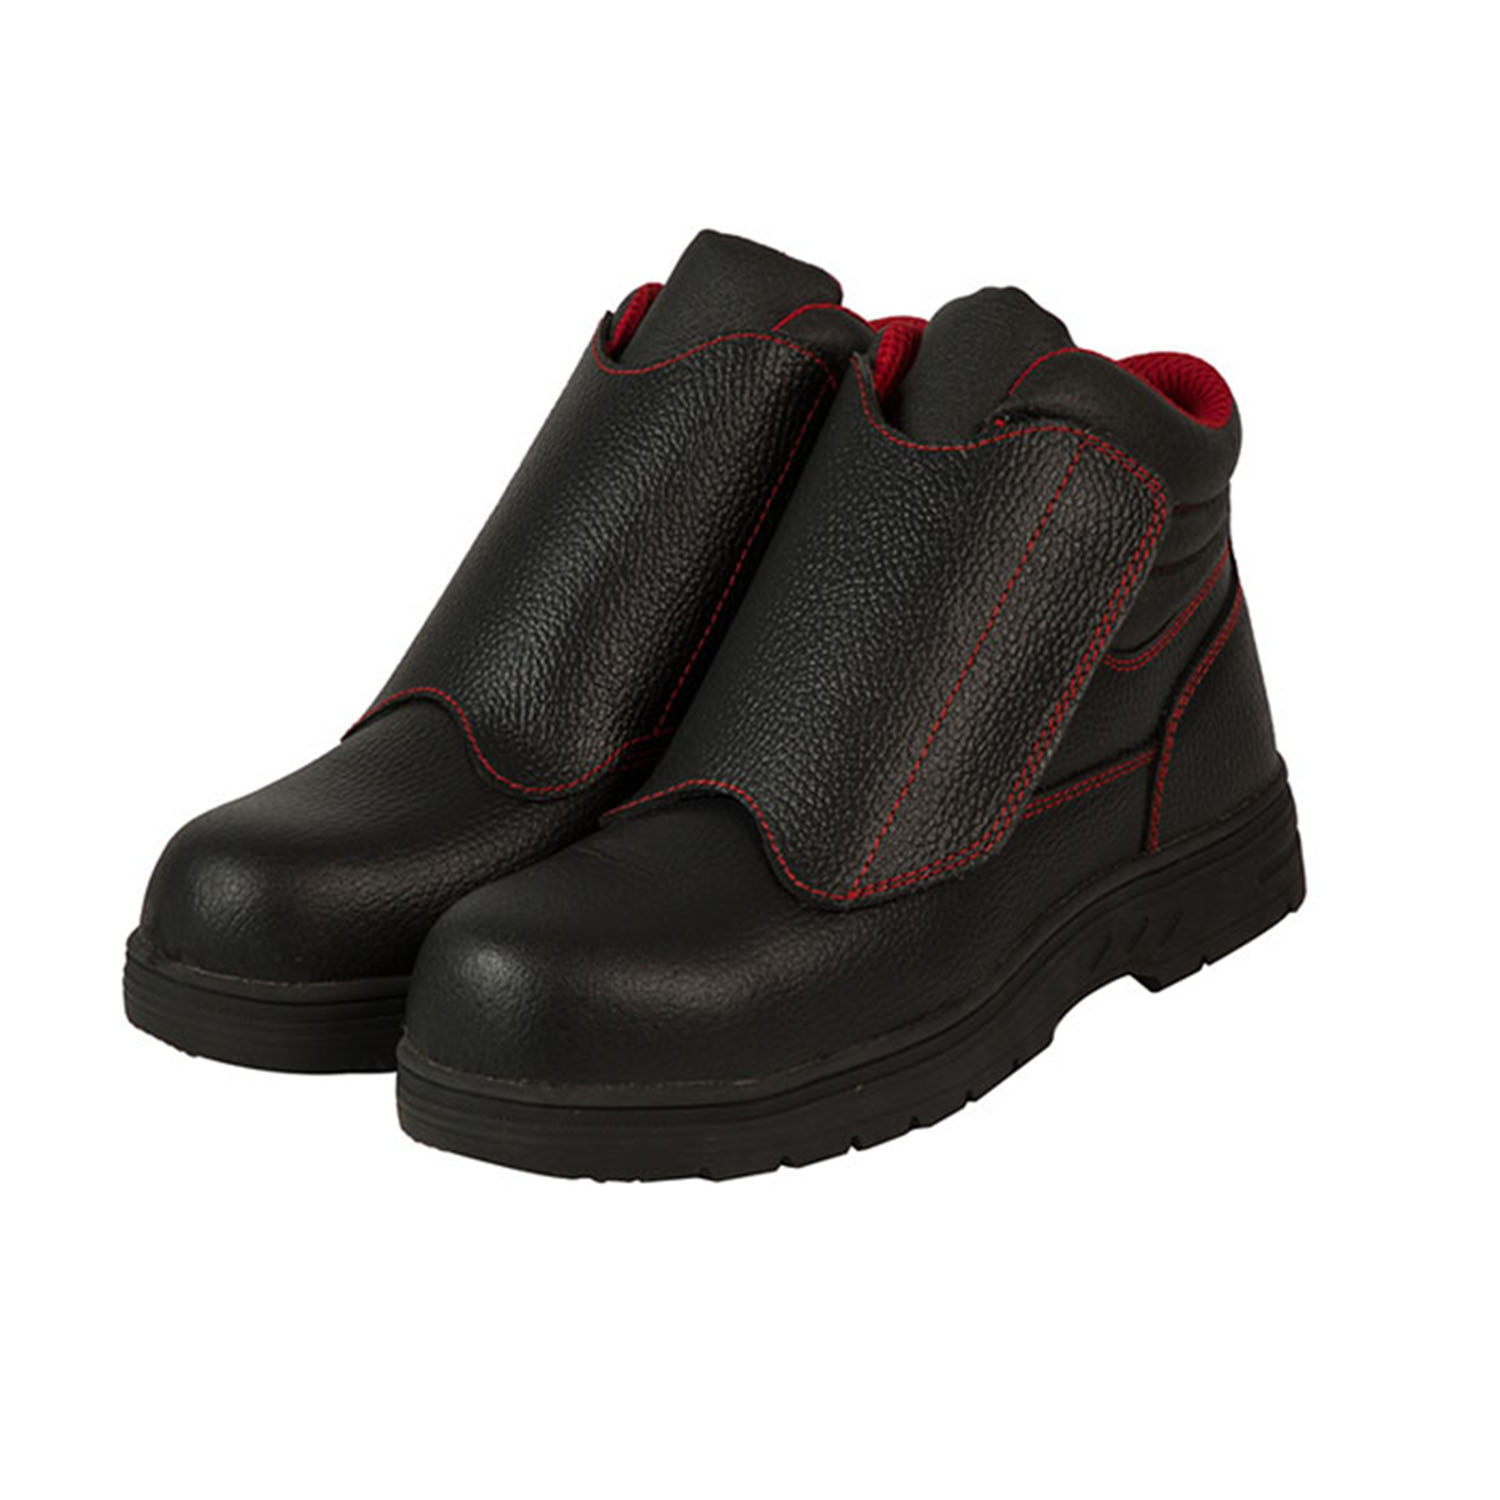 Welding Safety Boots - ZIMAI Safety